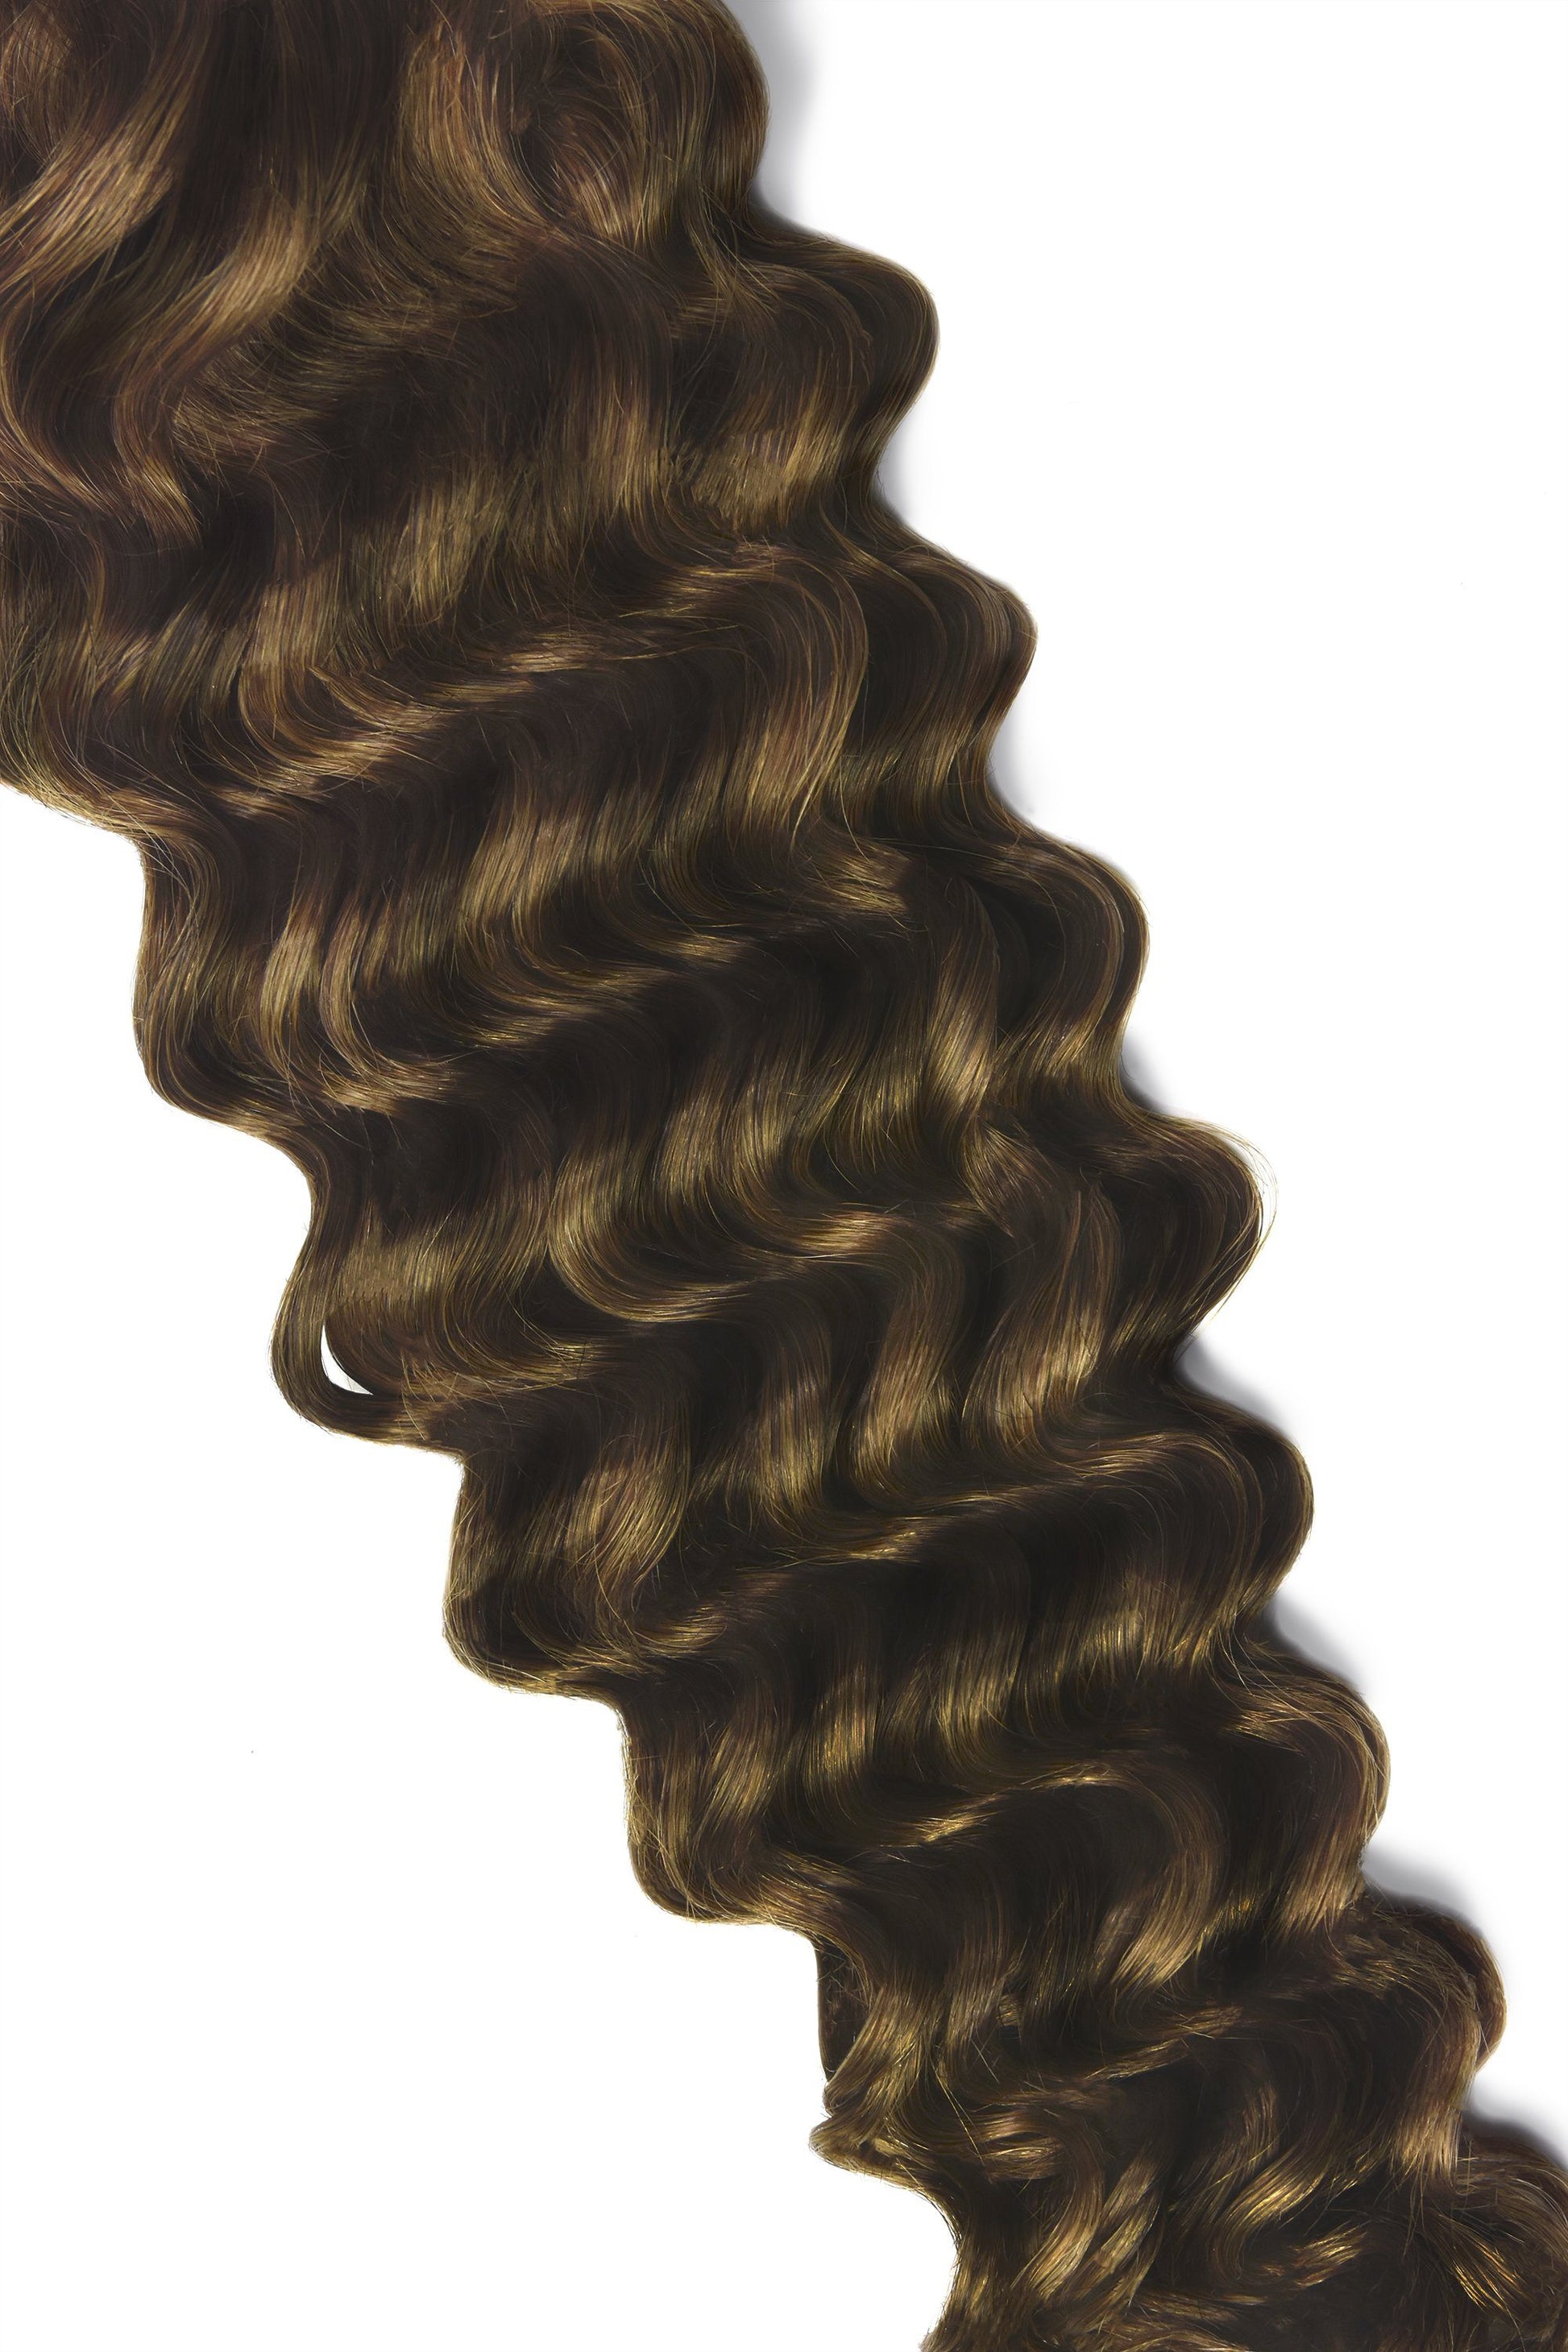 Curly Full Head Remy Clip in Human Hair Extensions #2/4/6 Curly Clip In Hair Extensions cliphair 